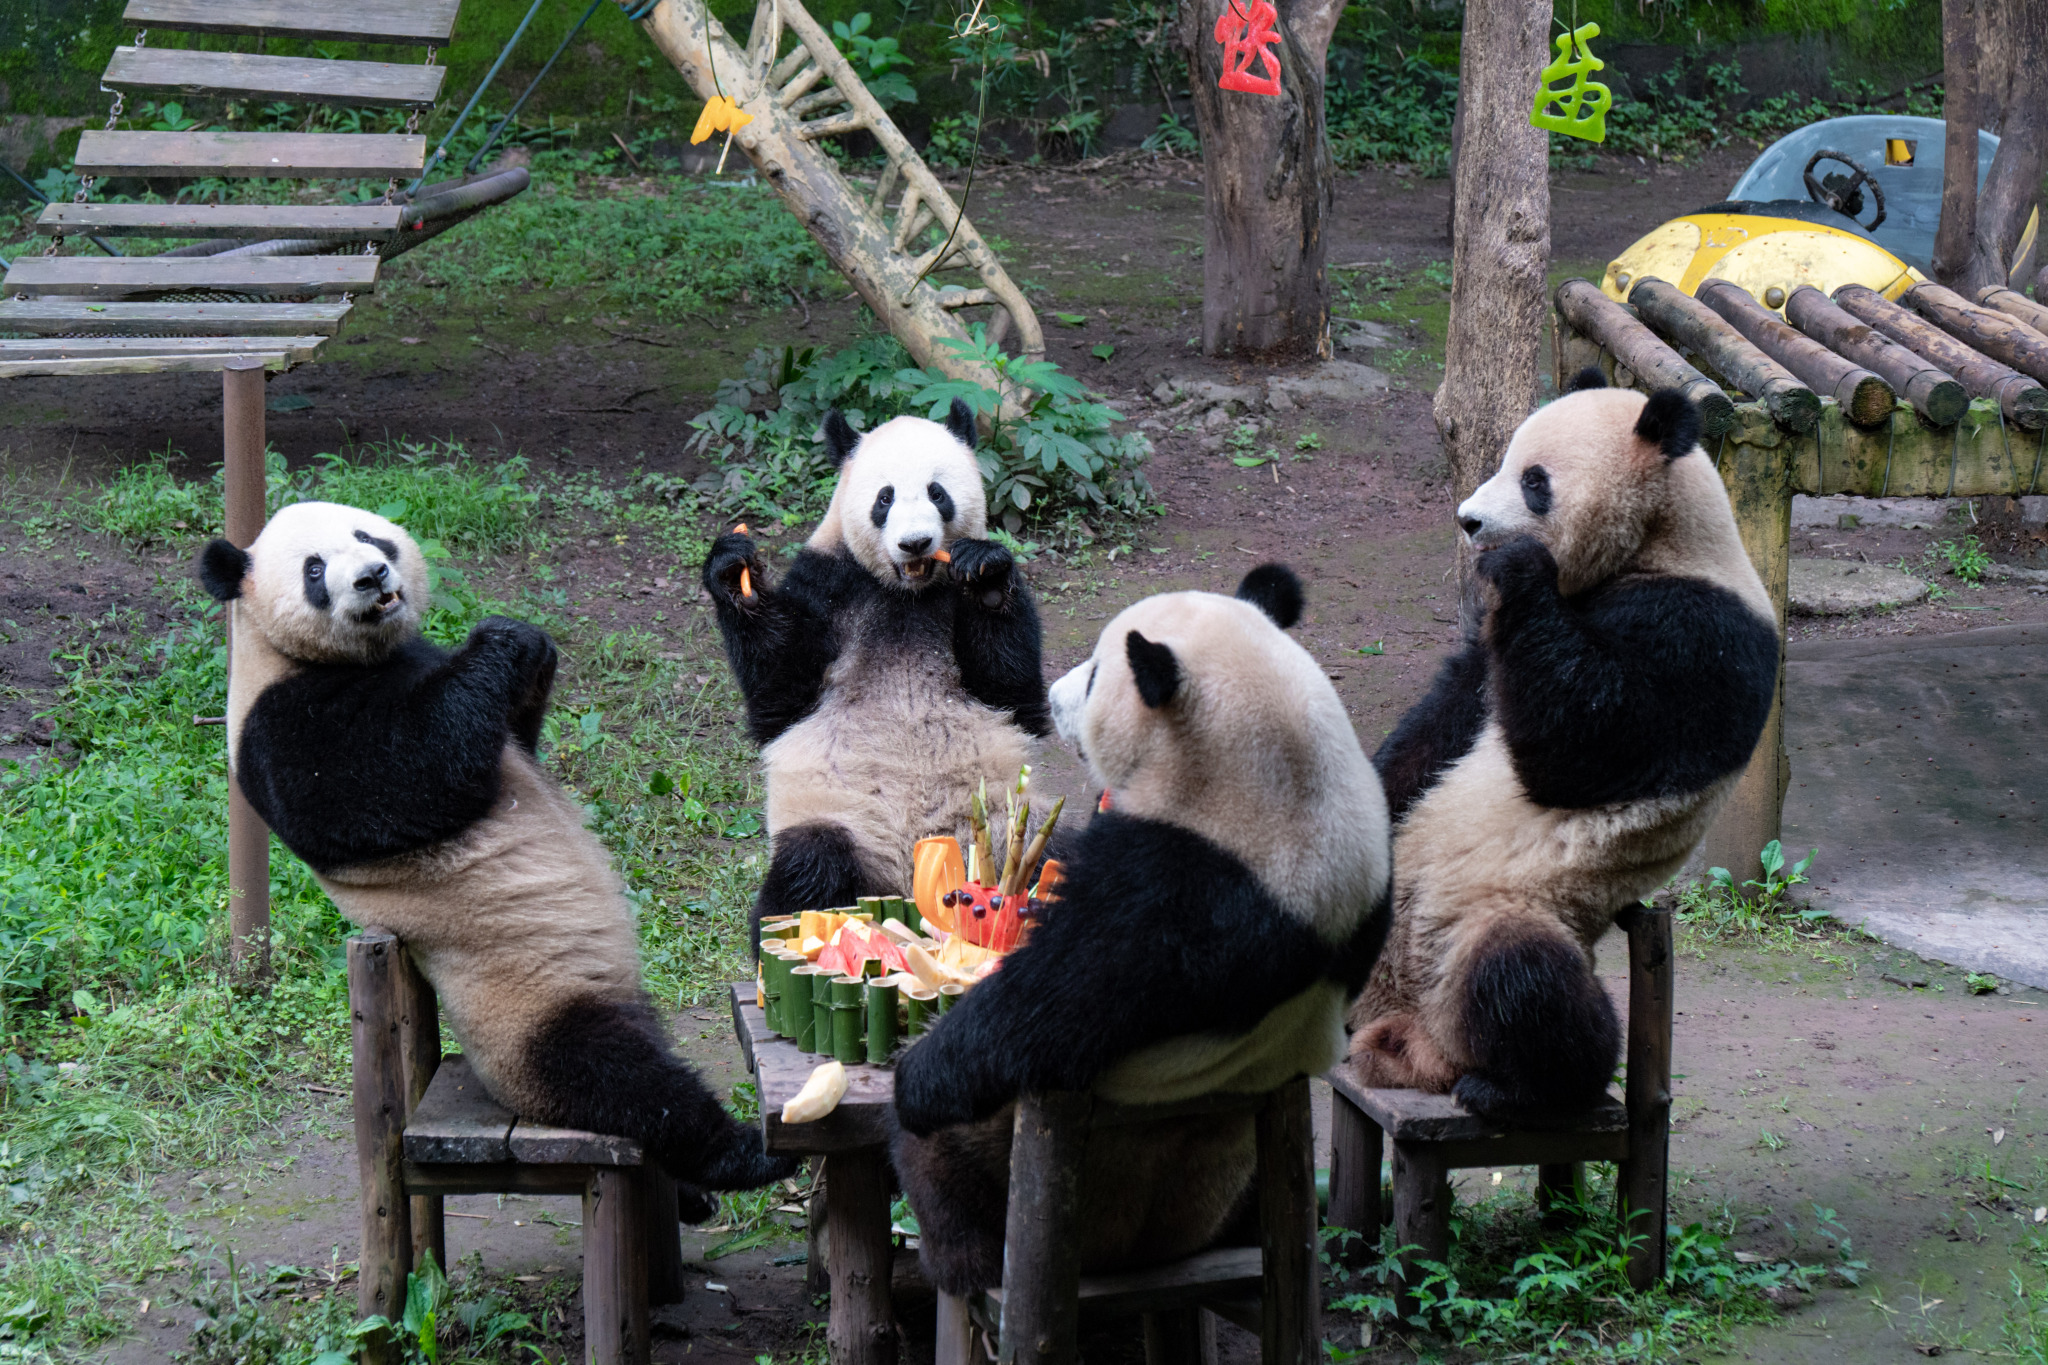 Shuangshuang and Chongchong, Xixi and Qingqing, two pairs of giant panda twins at the Chongqing Zoo, enjoy a birthday cake made of bamboo shoots and various kinds of fruits as part of their fifth birthday party in southwest China's Chongqing Municipality, June 23, 2024. /CFP